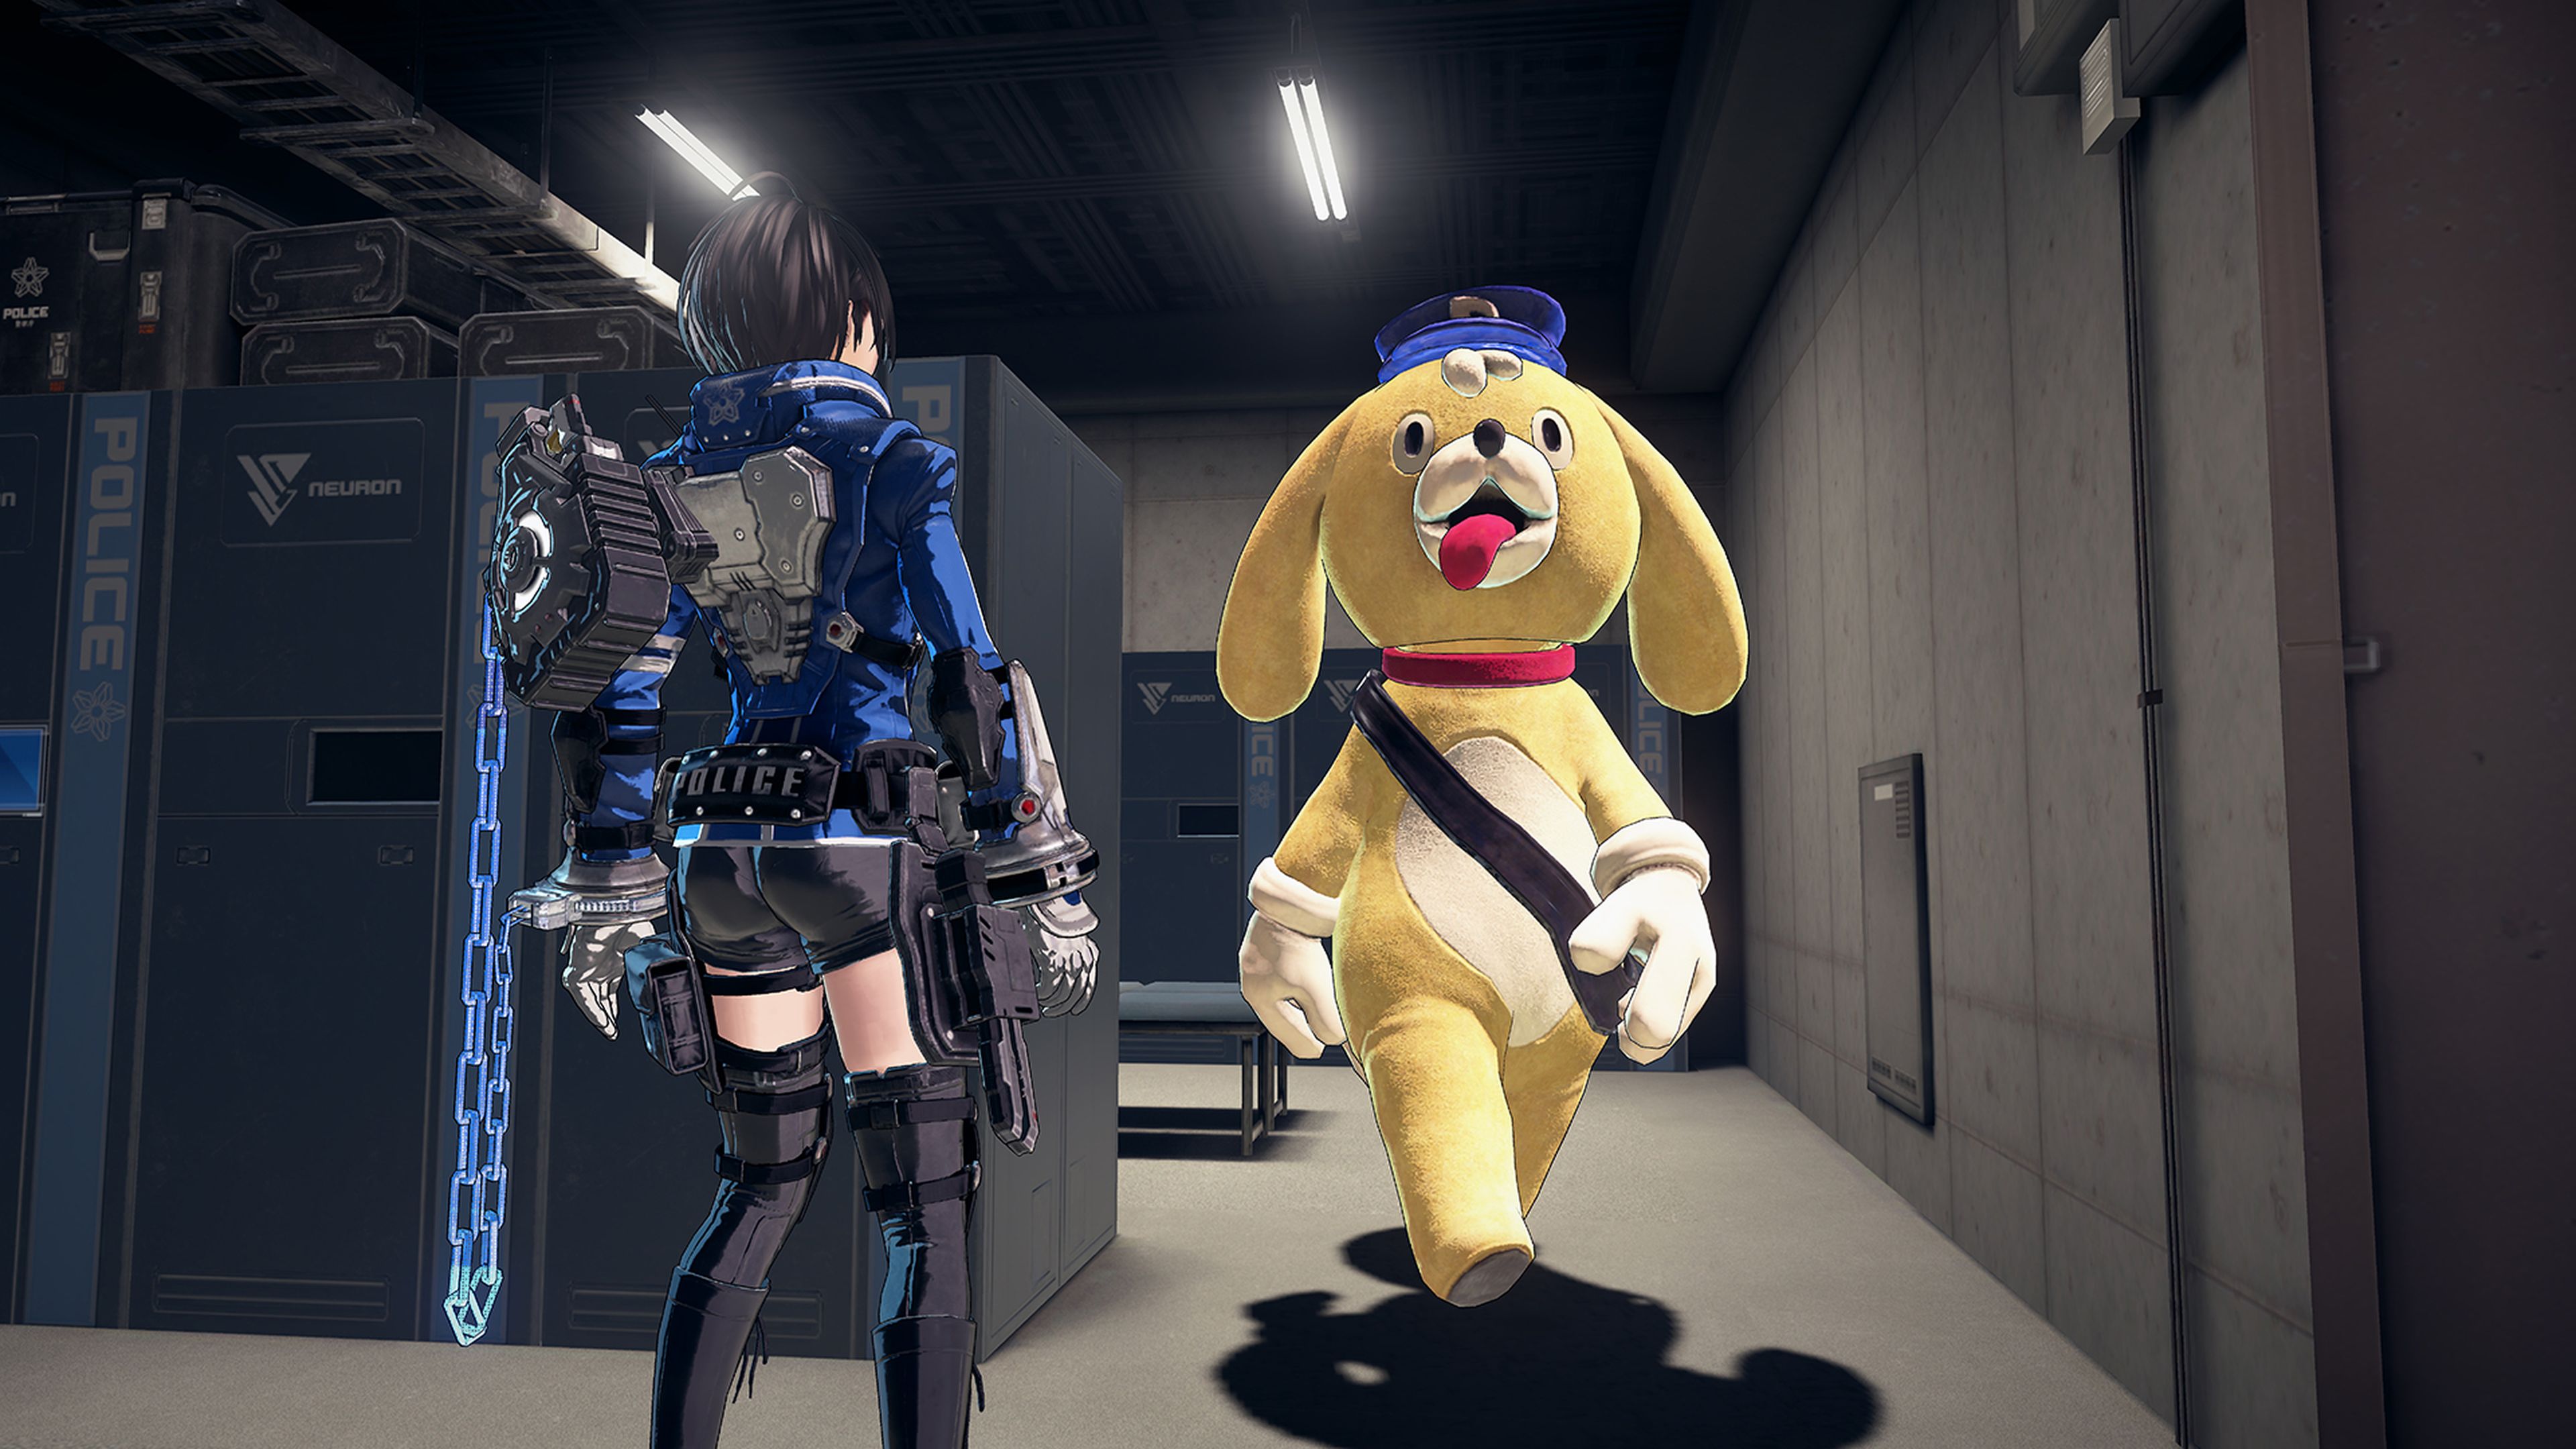 astral chain